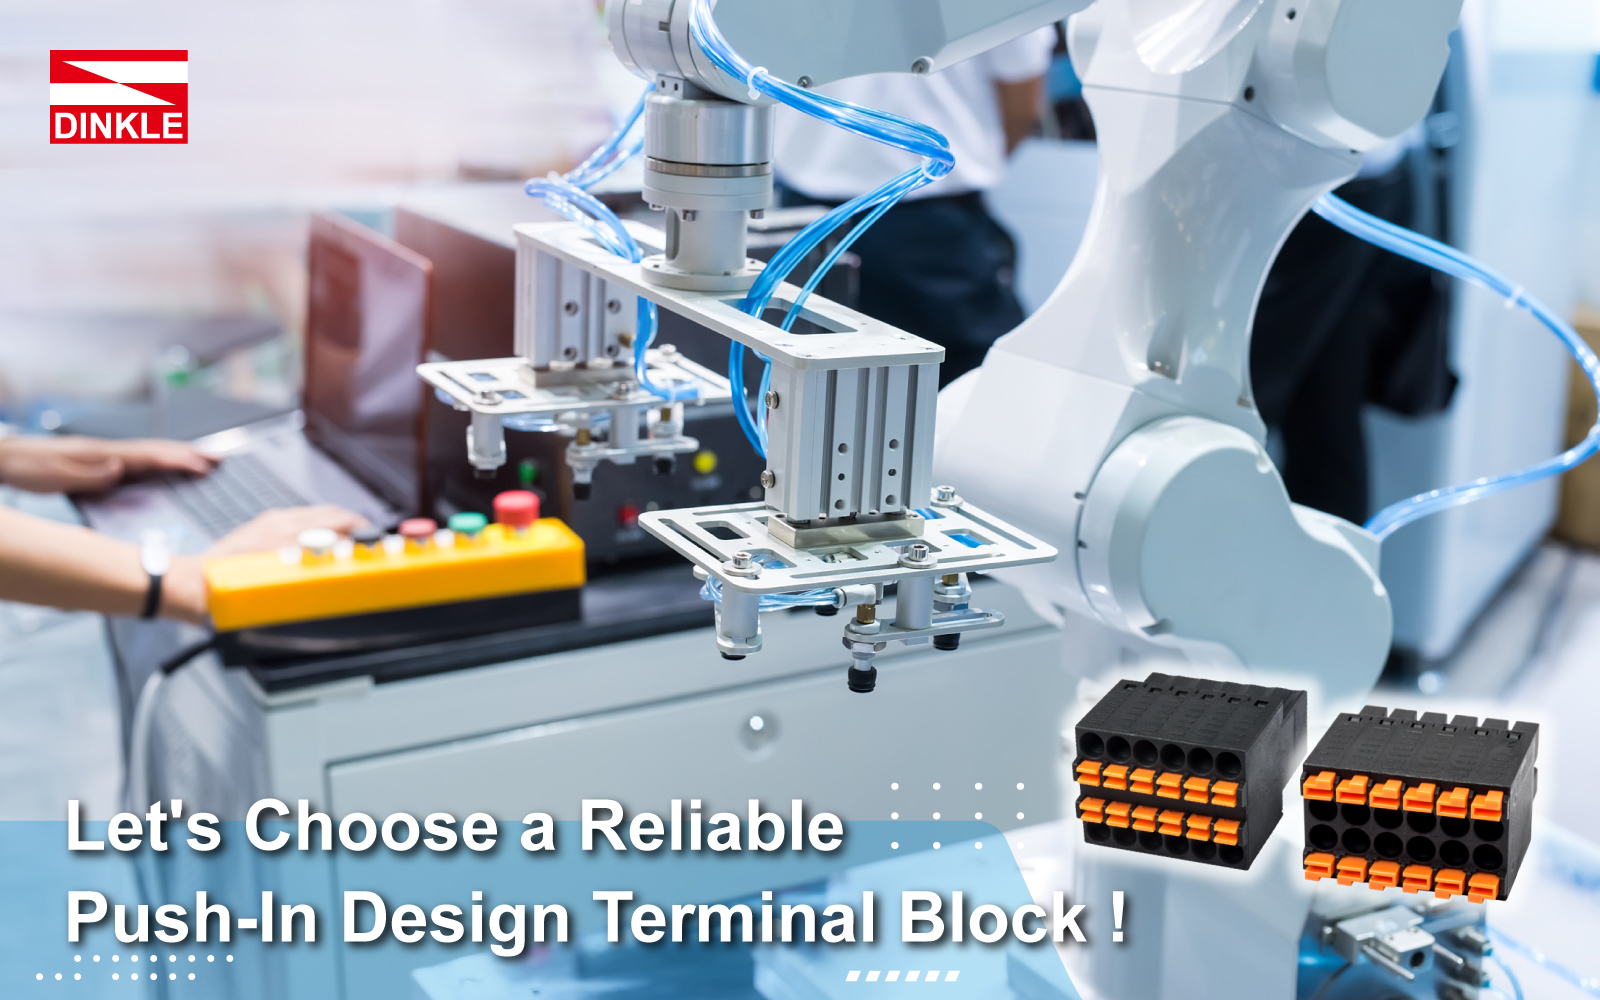 Let's Choose a Reliable Push-In Design Terminal Block! 